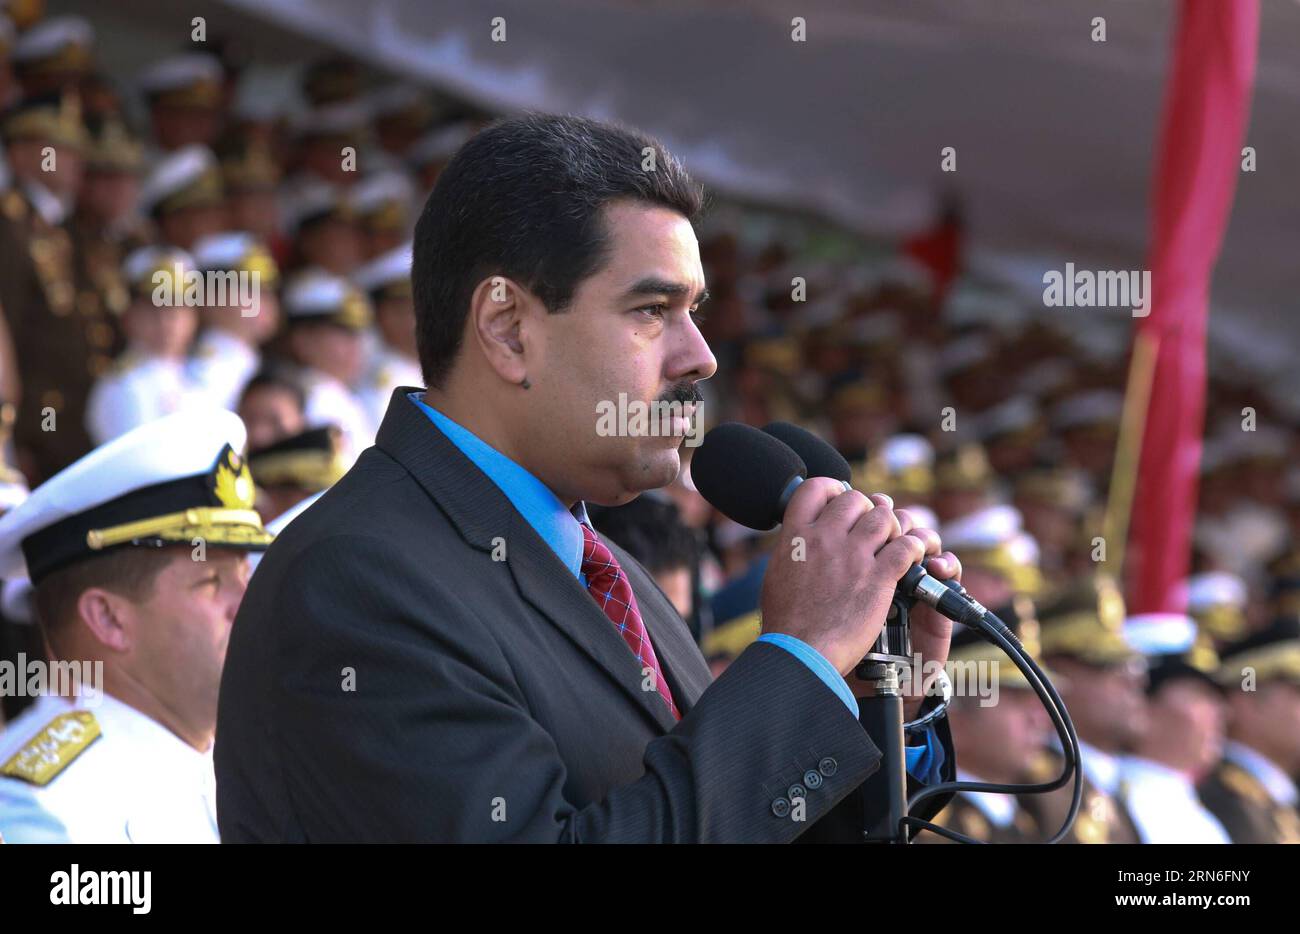 (150725) -- VARGAS,  - Image provided by , shows Venezuelan President Nicolas Maduro addressing the ceremony in commemoration of the 192th anniversary of the naval battle of Lake Maracaibo, in the Ana Maria Campos Naval Base, in Catia La Mar, Vargas state, Venezuela, on July 24, 2015. ) VENEZUELA-VARGAS-POLITICS-MADURO VENEZUELA SxPRESIDENCY PUBLICATIONxNOTxINxCHN   150725 Vargas Image provided by Shows Venezuelan President Nicolas Maduro addressing The Ceremony in Commemoration of The 192th Anniversary of The Naval Battle of Lake Maracaibo in The Ana Mary Campos Naval Base in Catia La Mar Var Stock Photo